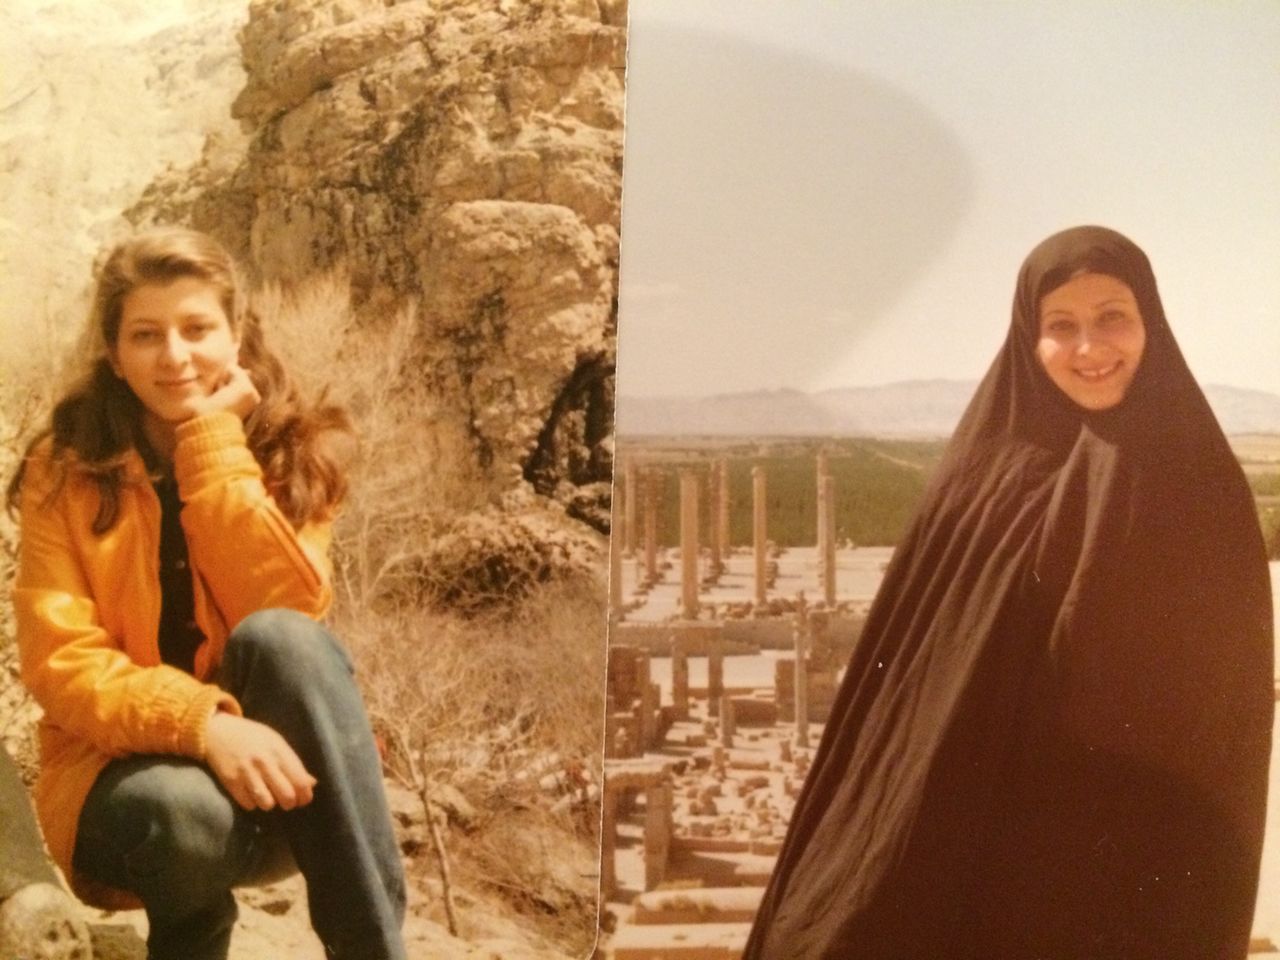 Iranian woman on separate trips to Persepolis pre- and post- Islamic revolution